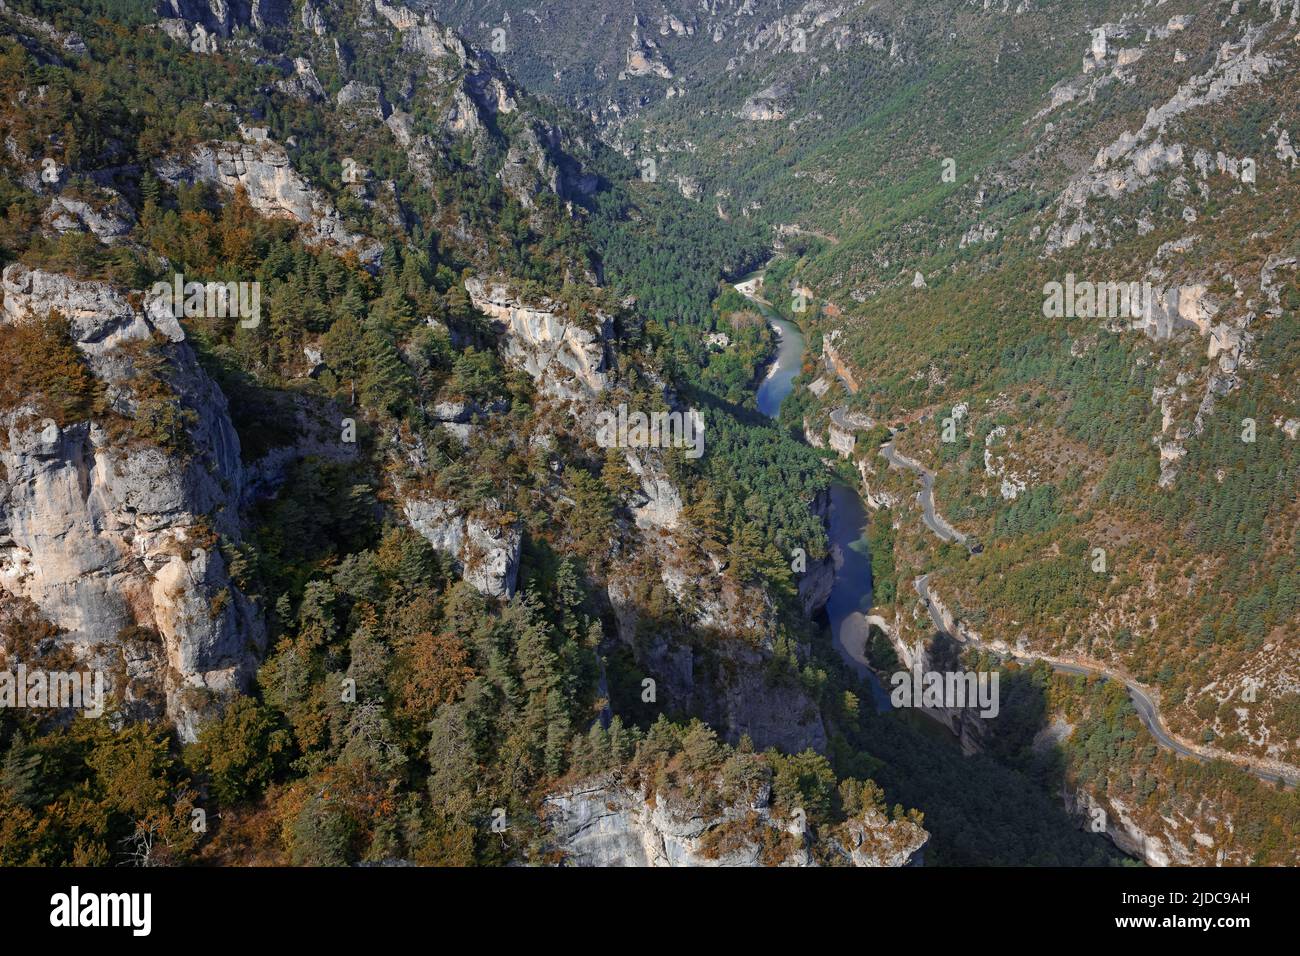 France, Lozère The Tarn gorges from the Méjean causse, landscape Stock Photo